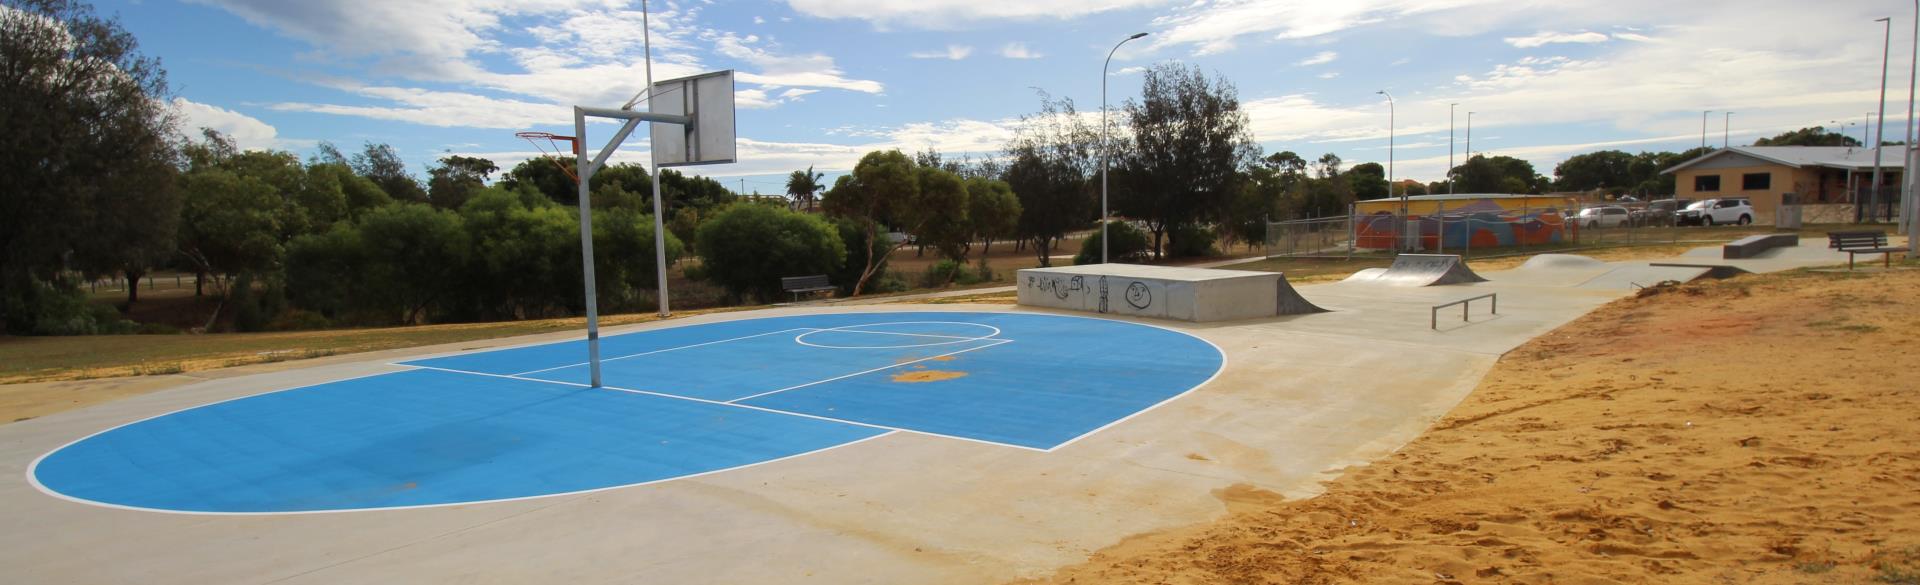 Basketball half court and skate/scoot track